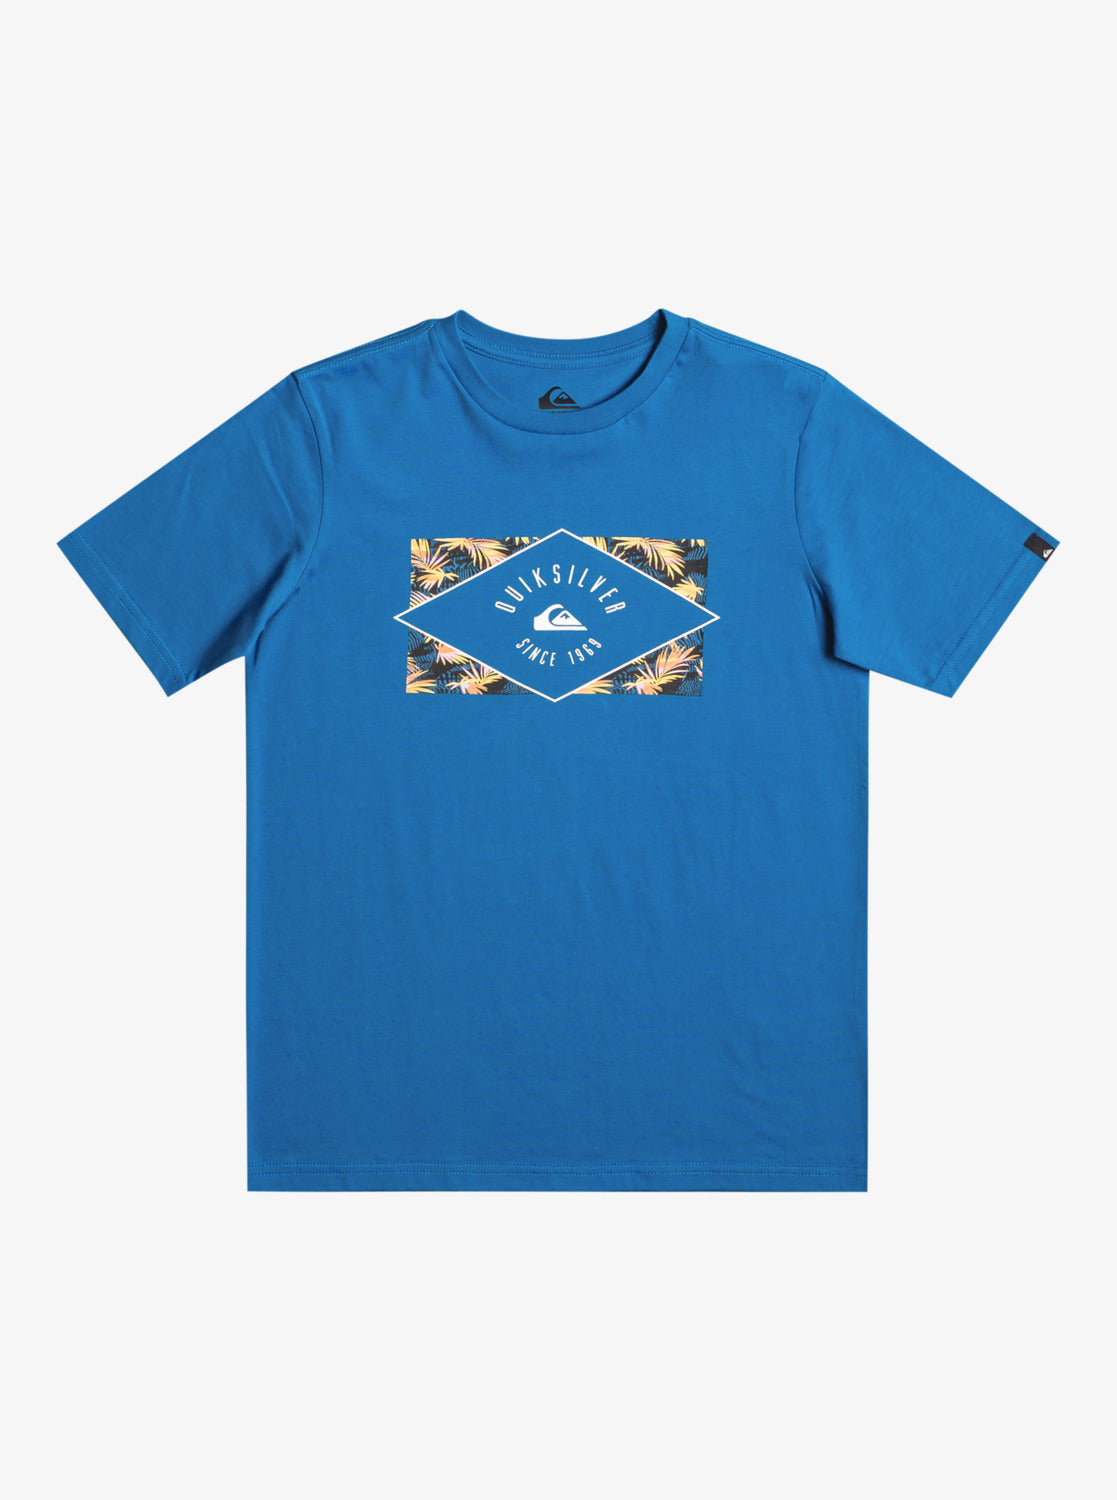 Quiksilver Circled Line Tee in Blue